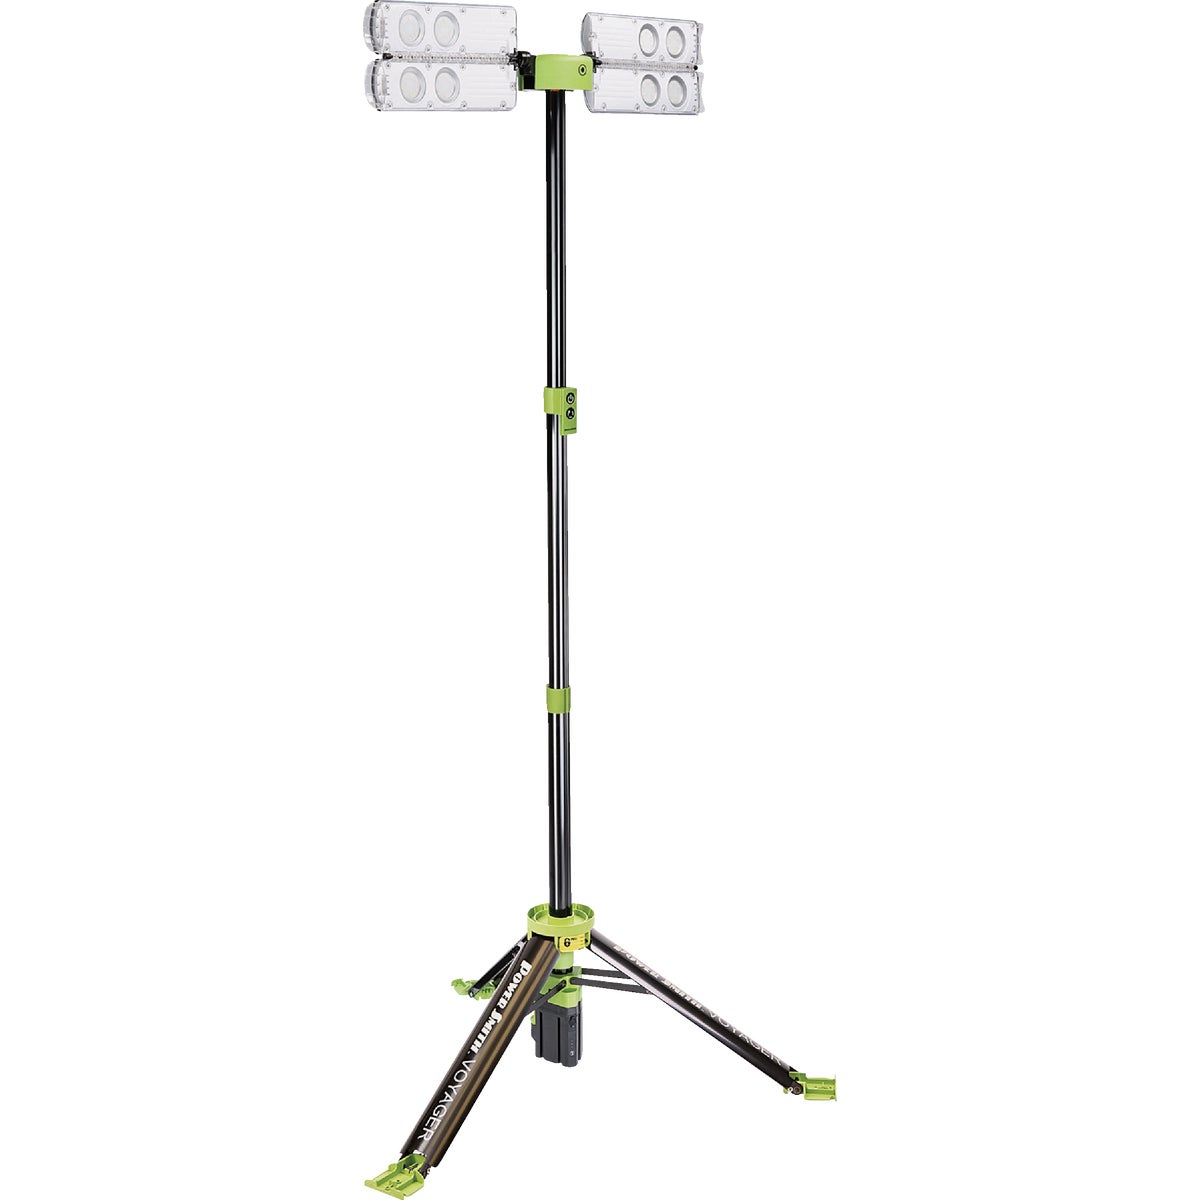 PowerSmith Voyager 23-Way LED Collapsible Tower Corded/Cordless Work Light